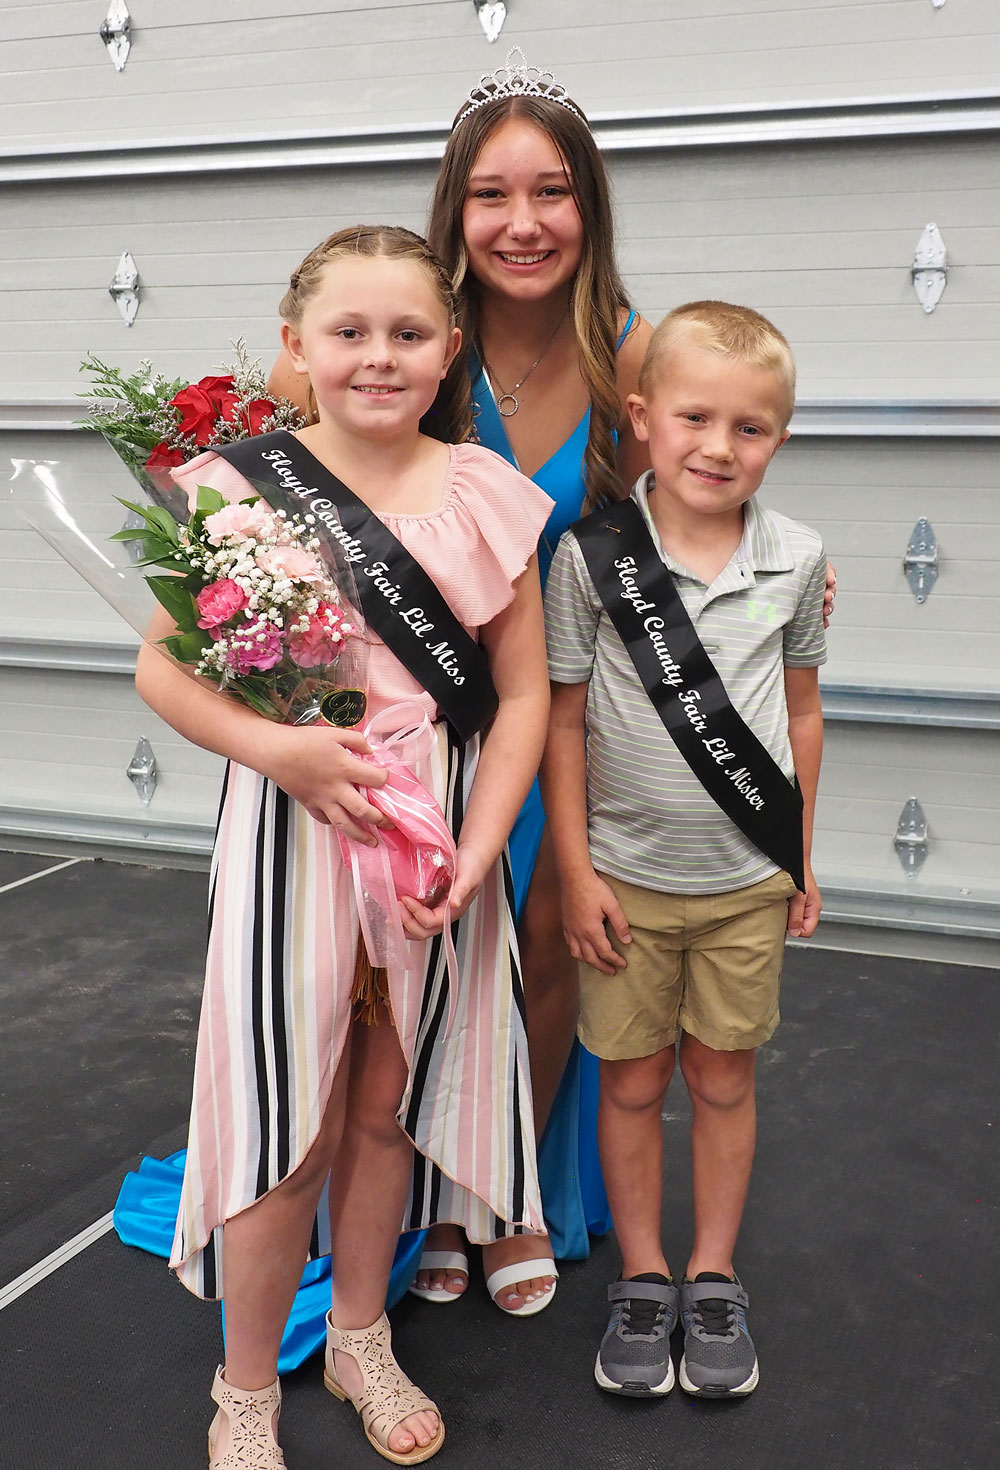 18 little misses and five little misters vie for Floyd County Fair titles